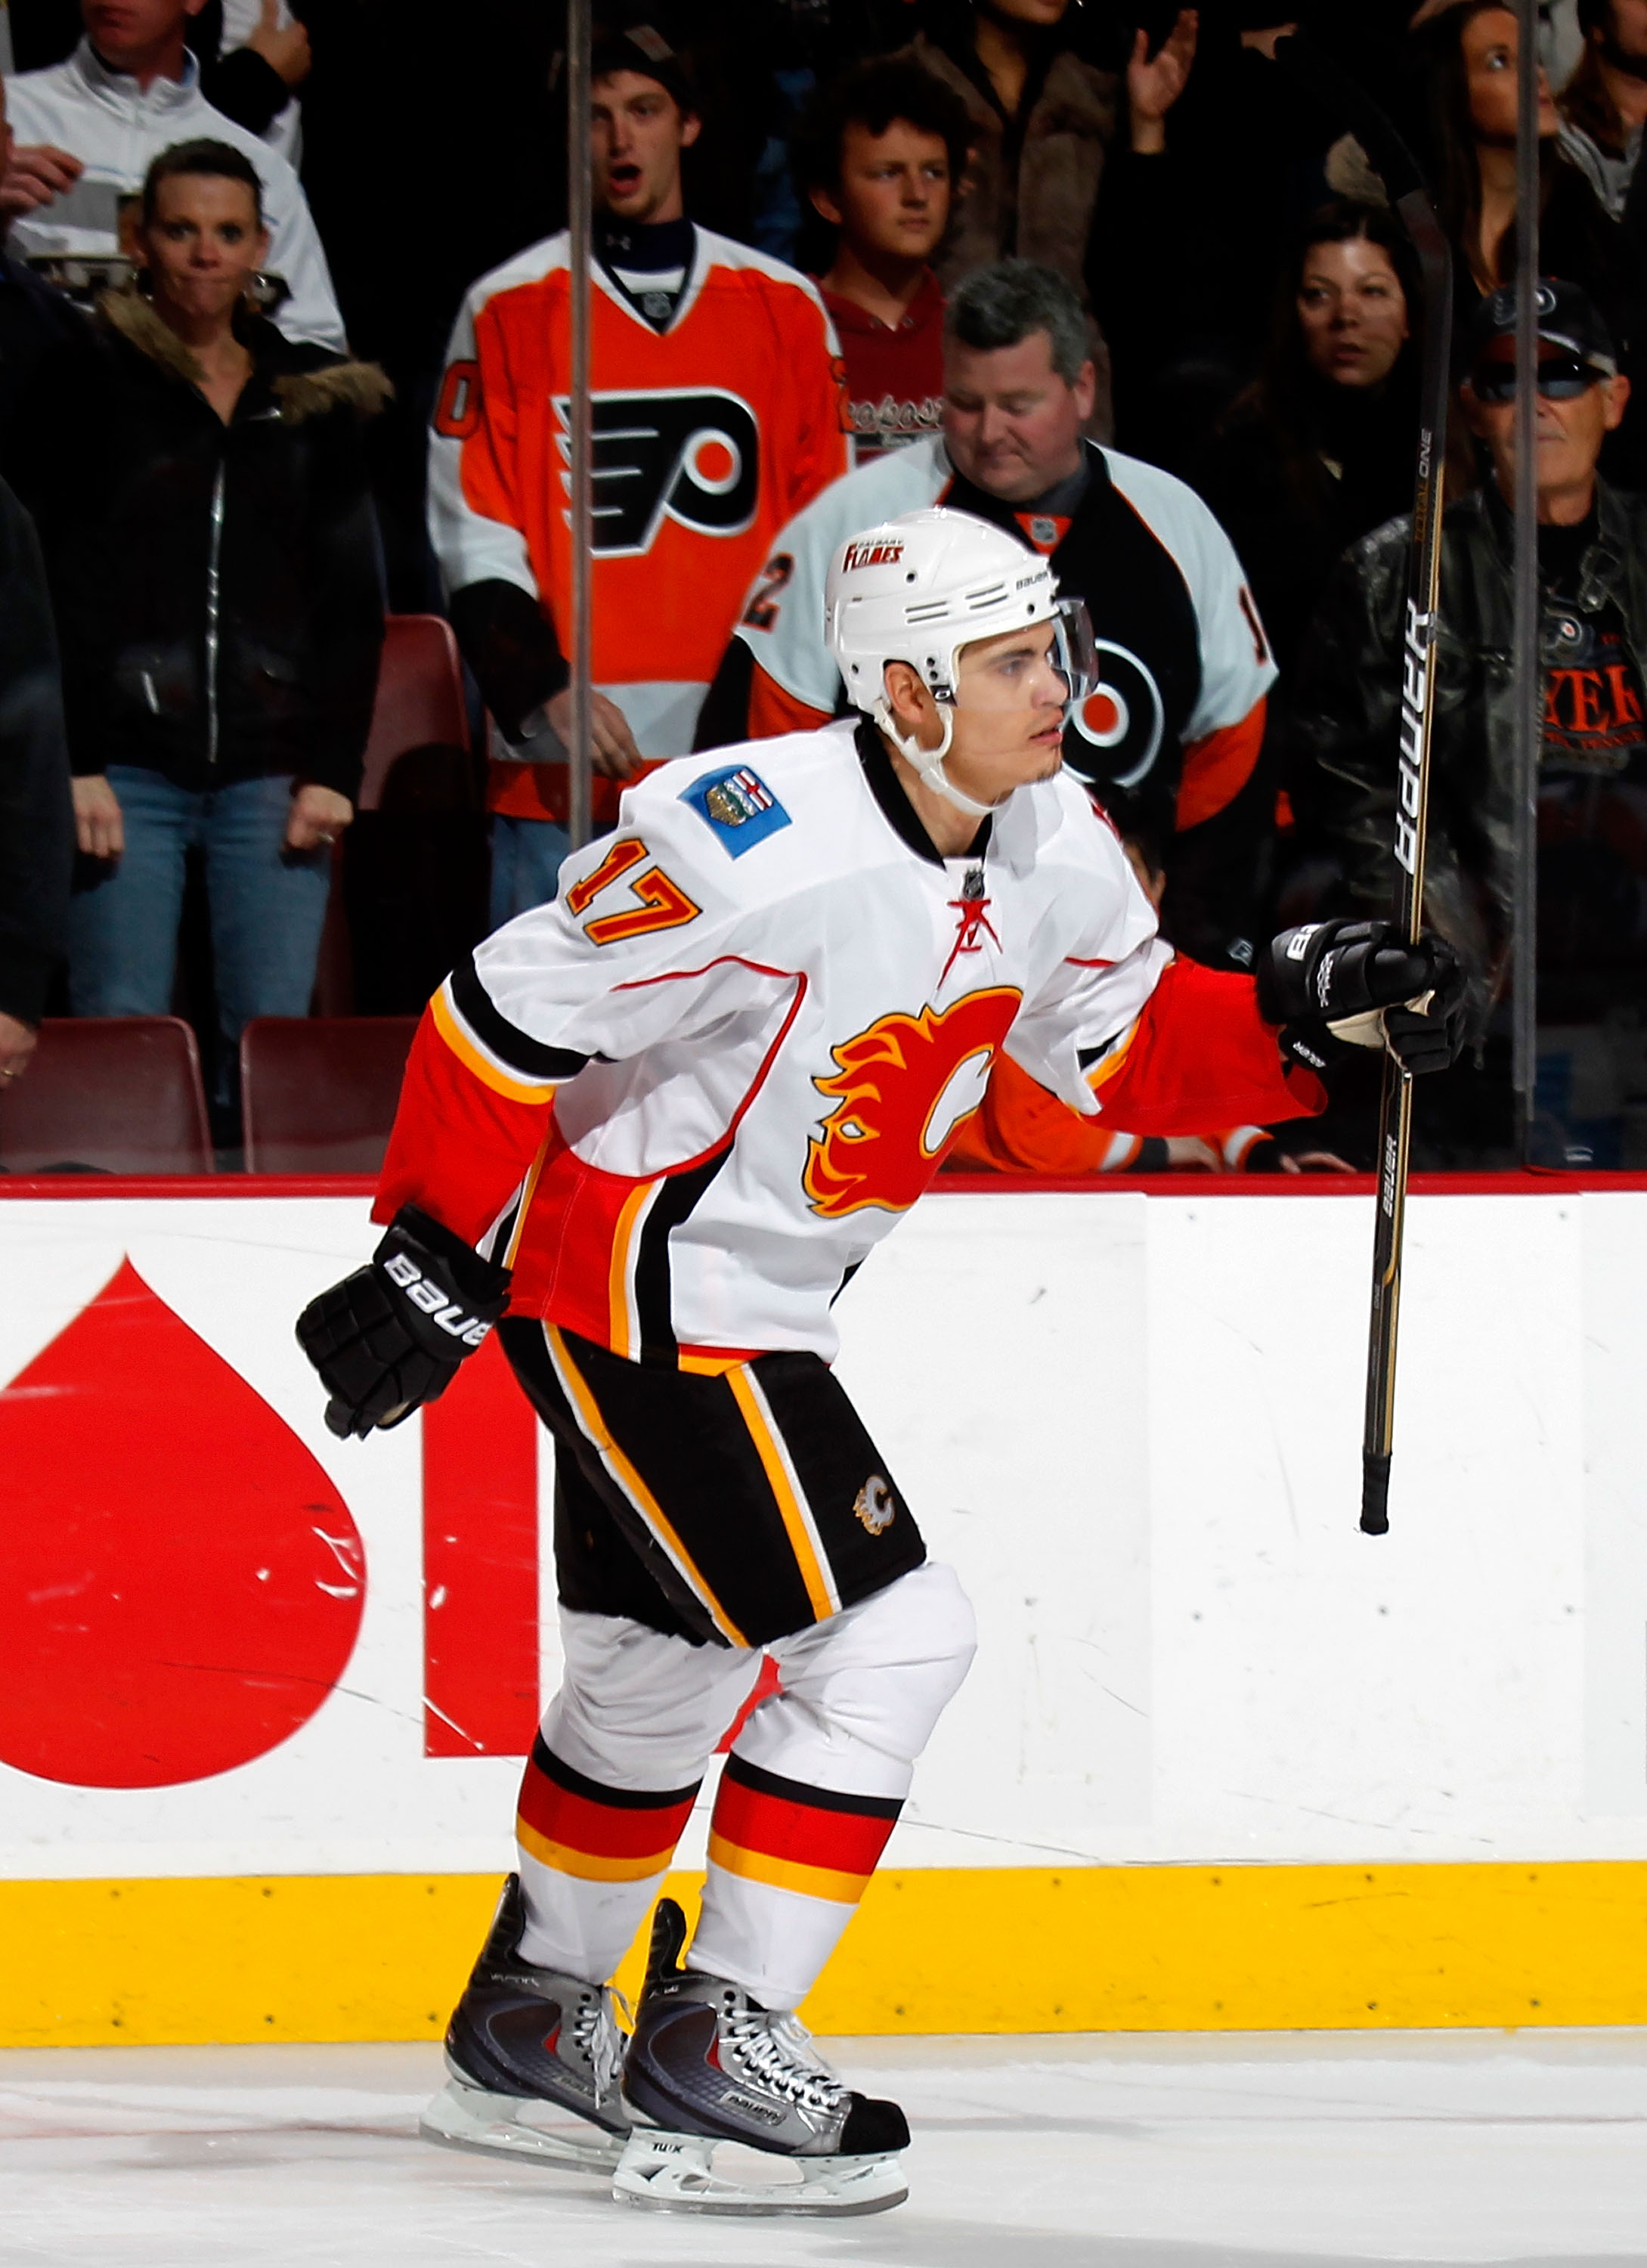 PHILADELPHIA - NOVEMBER 26:   Rene Bourque #17 of the Calgary Flames raises his stick in front of the dejected Flyers fans after scoring the winning goal in the shootout of a hockey game against the Philadelphia Flyers at the Wells Fargo Center on Novembe